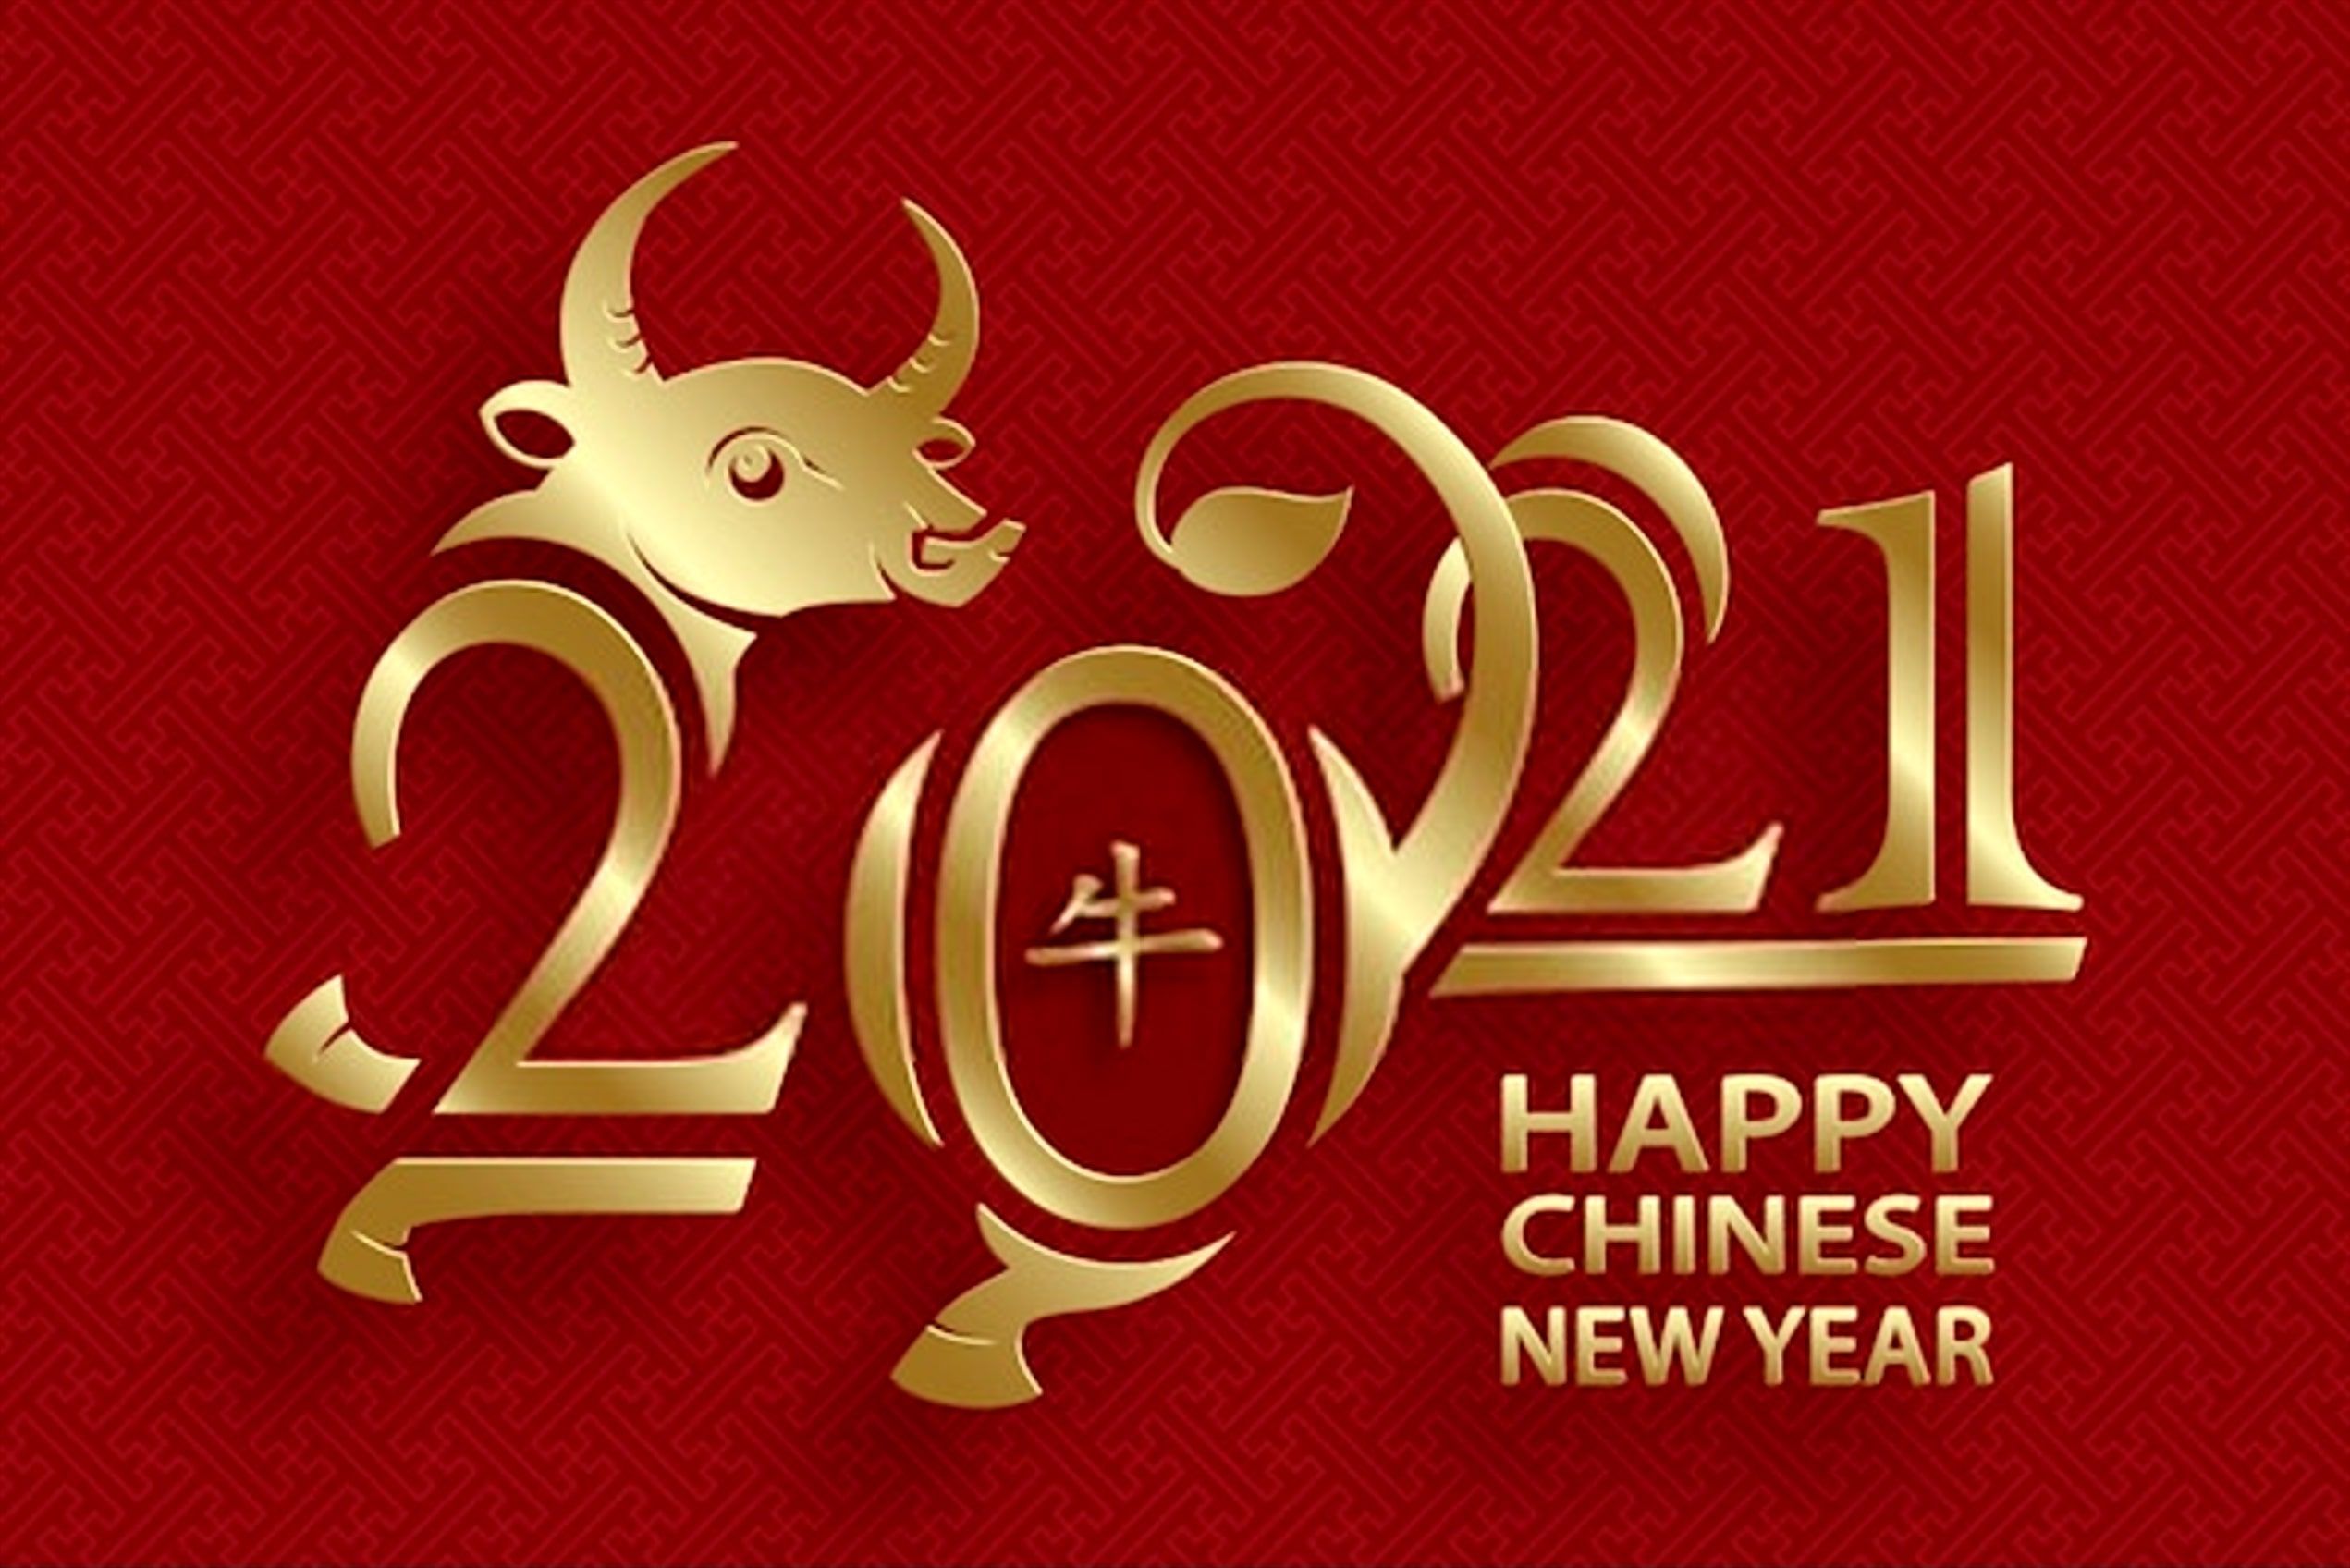 DIFFUL SOLAR PUMP - - Chinese New Year holiday notice